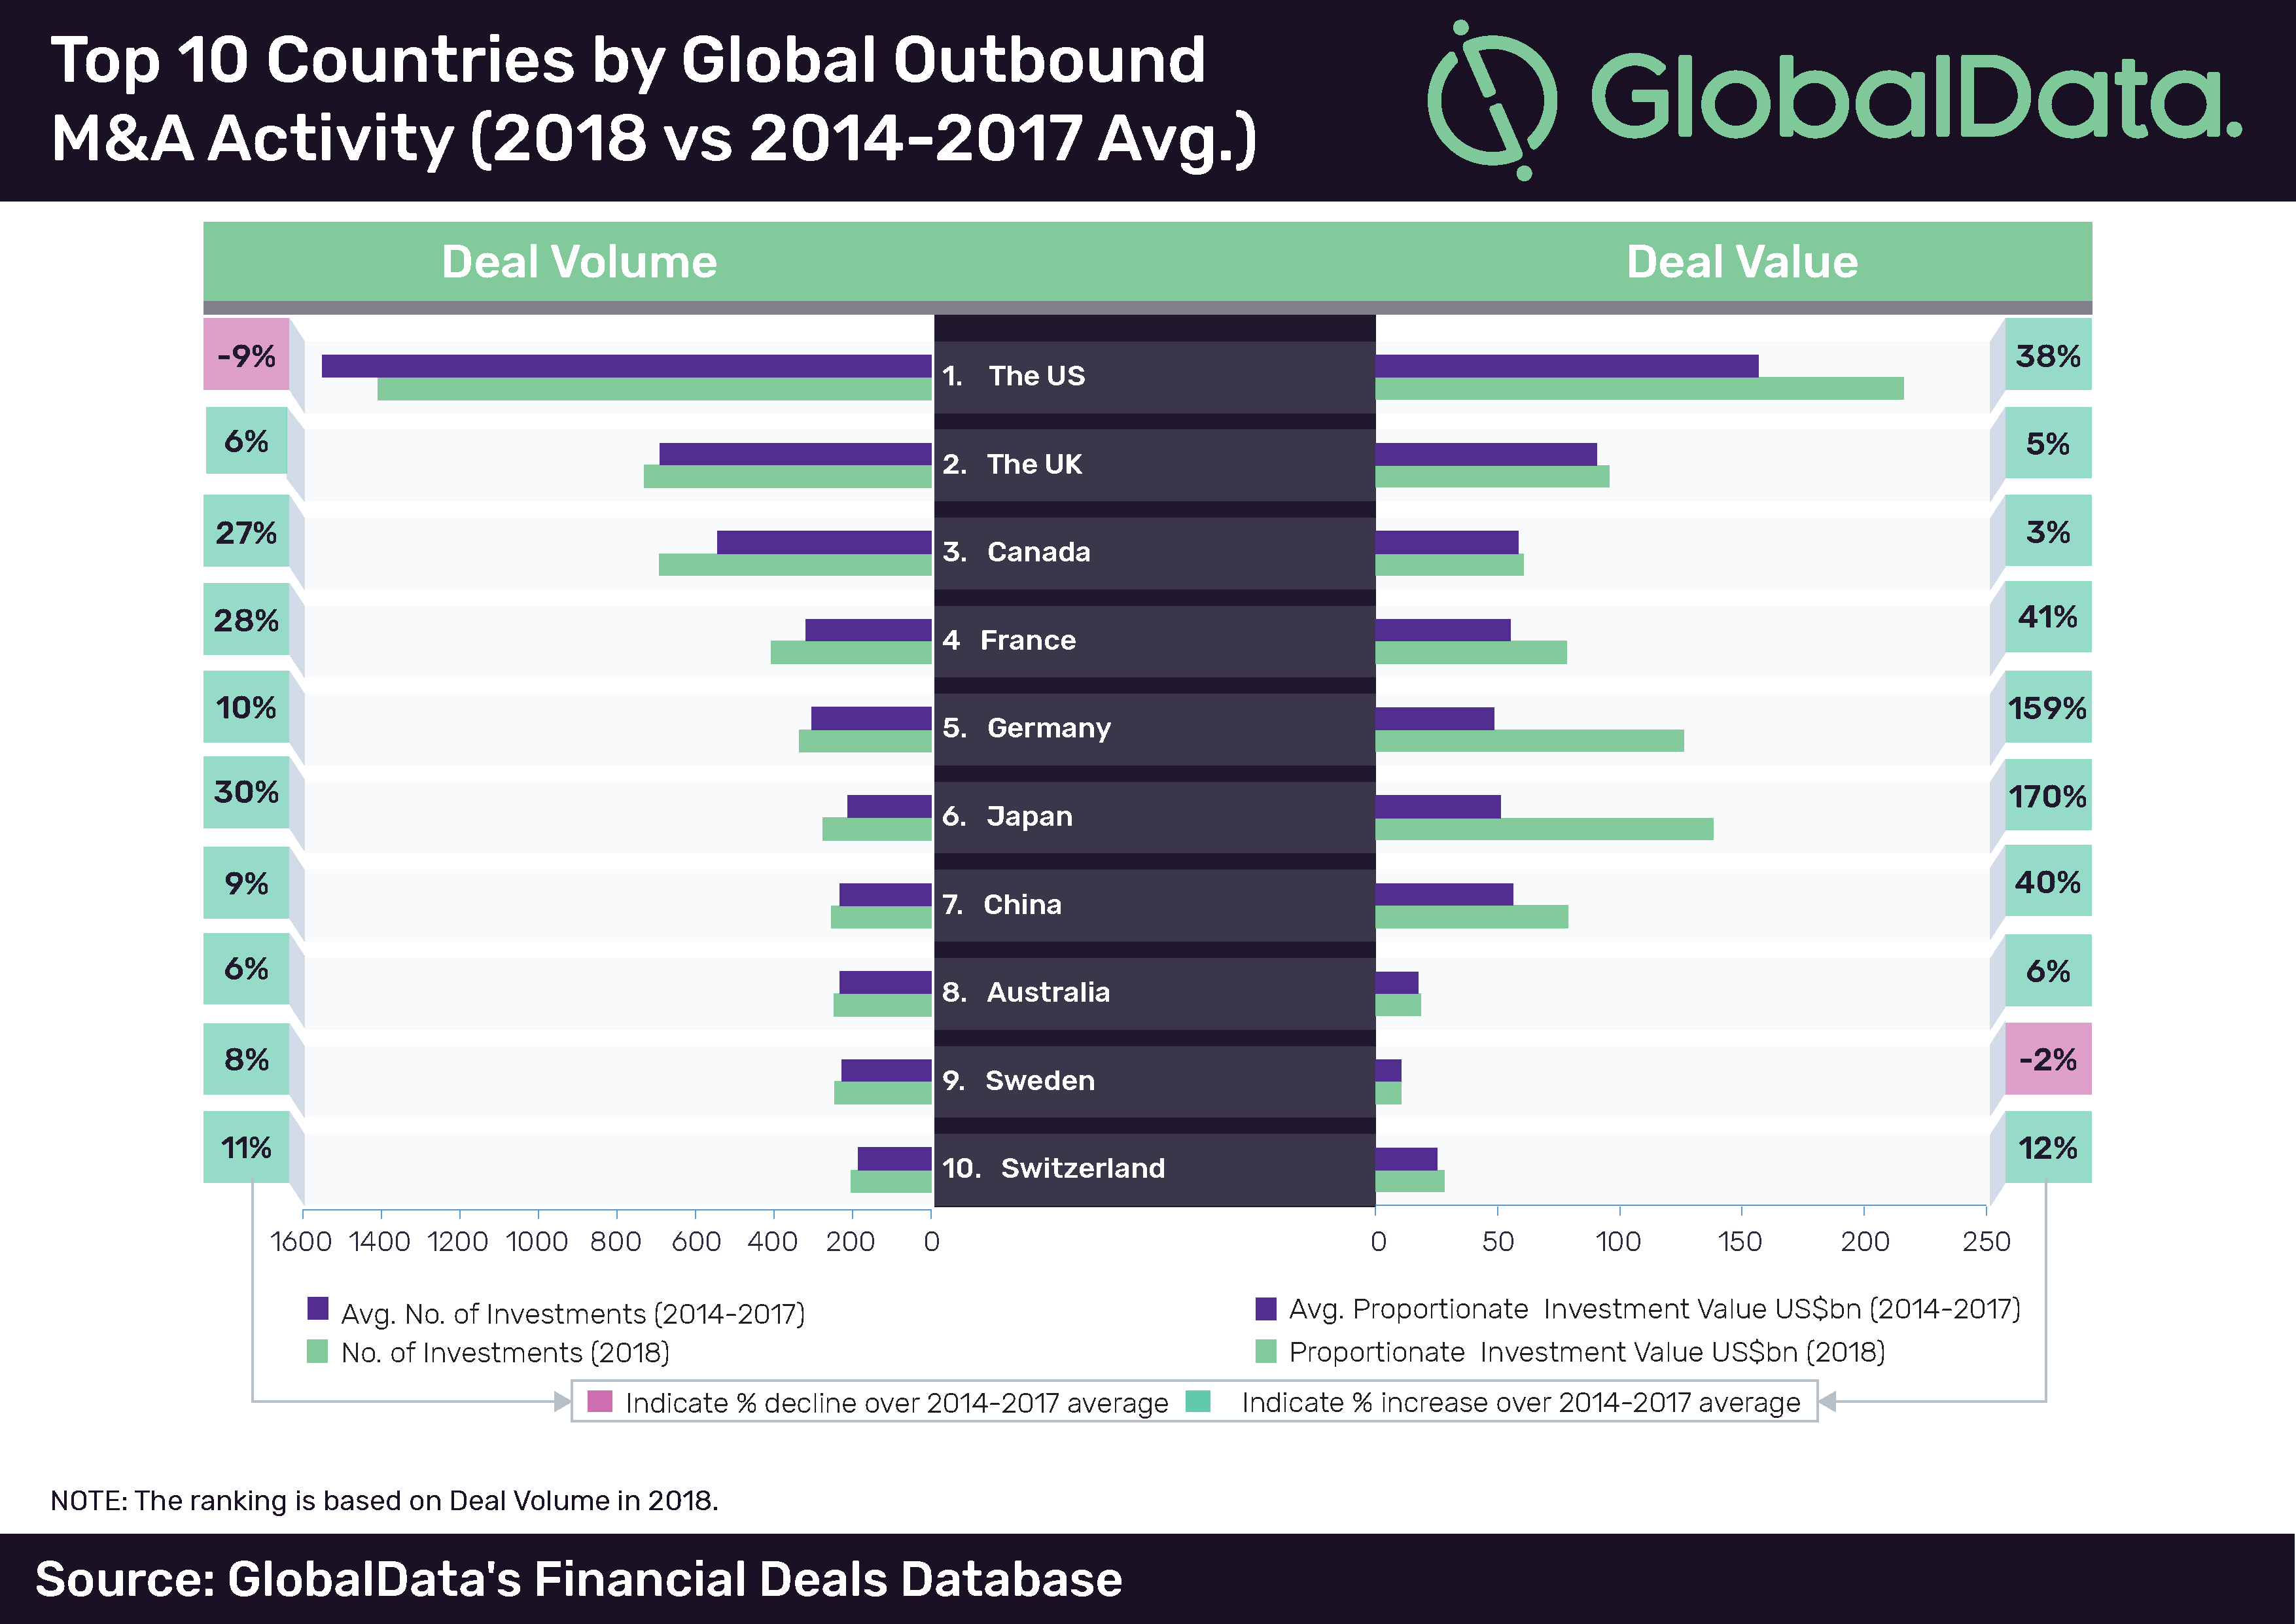 Top 10 countries by Global Outbound M&A Activity